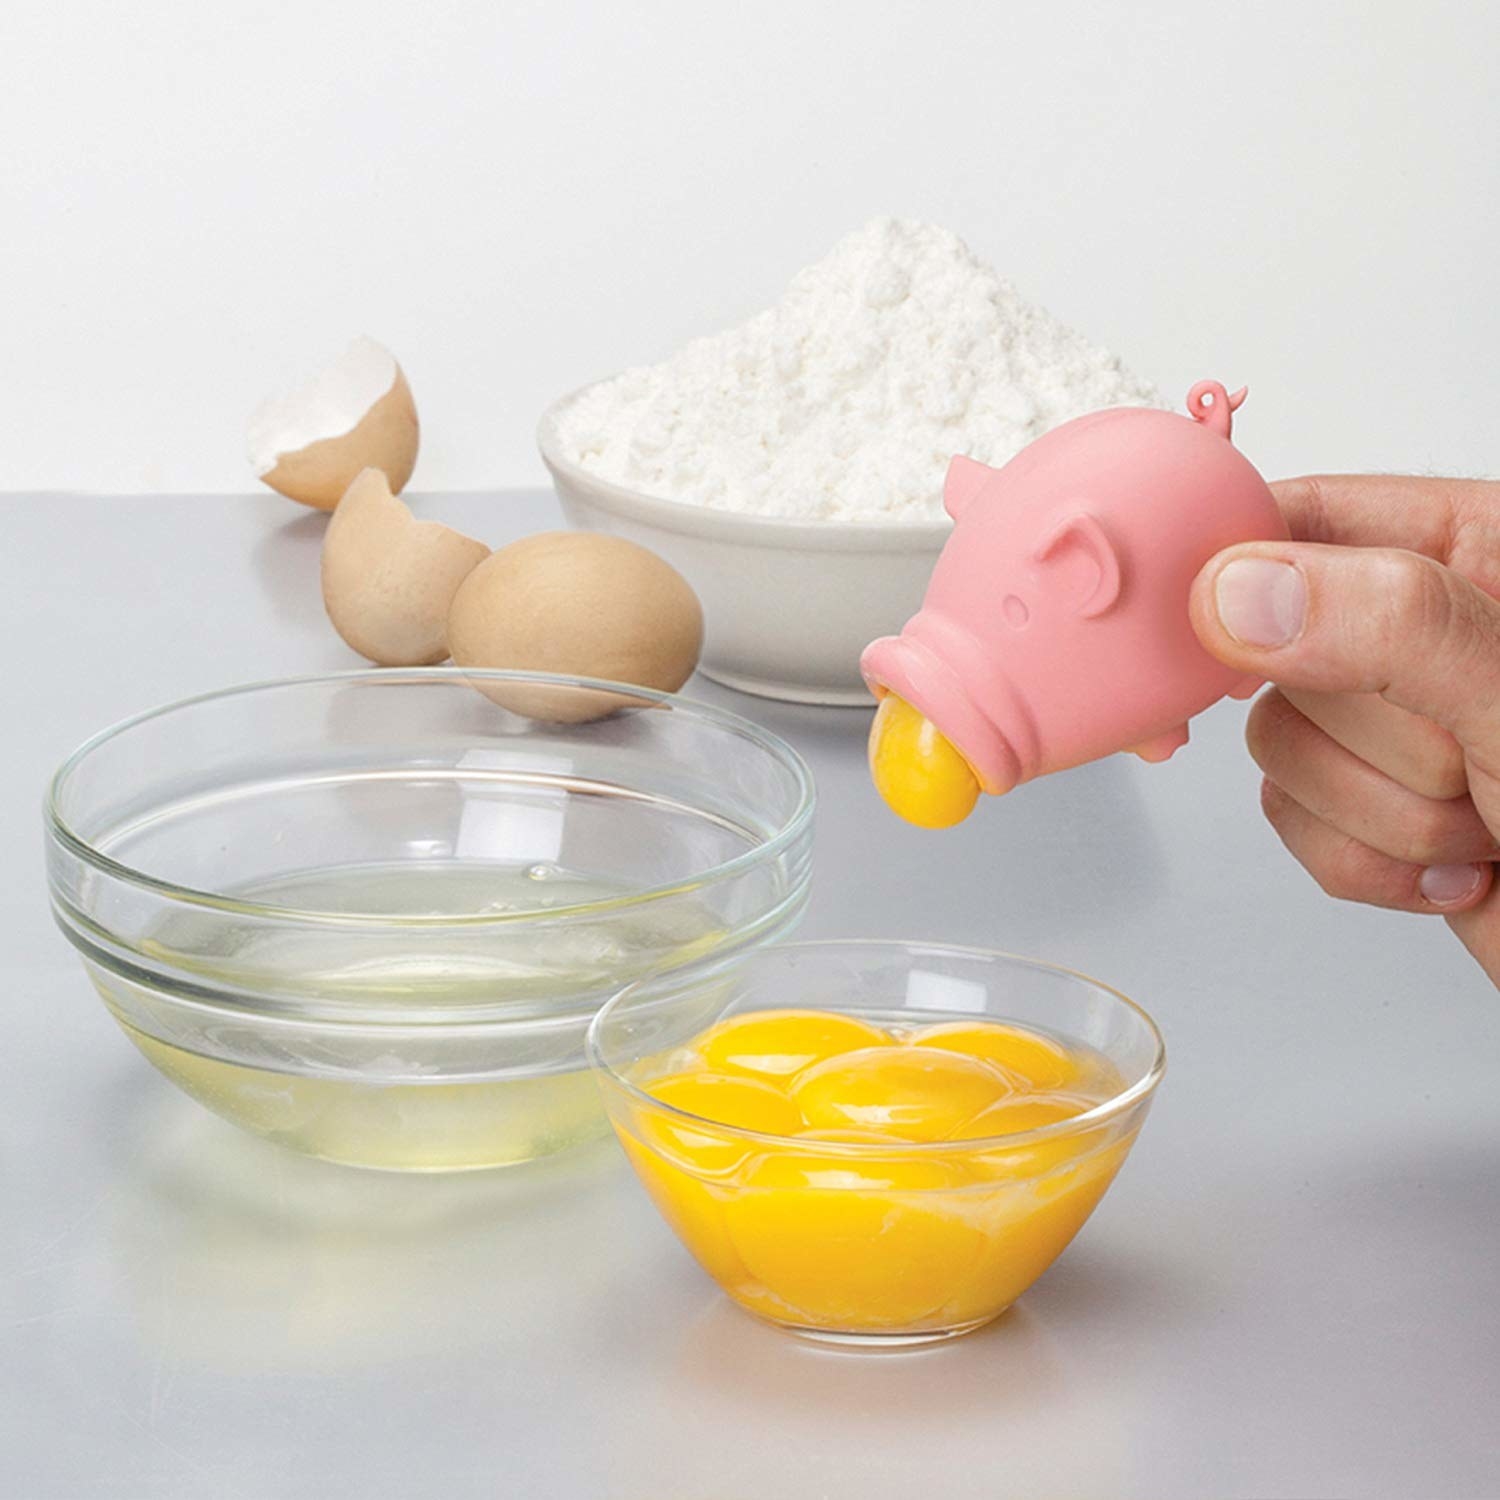 A pig-shaped silicone suction tool pulling up an egg yolk from a bowl